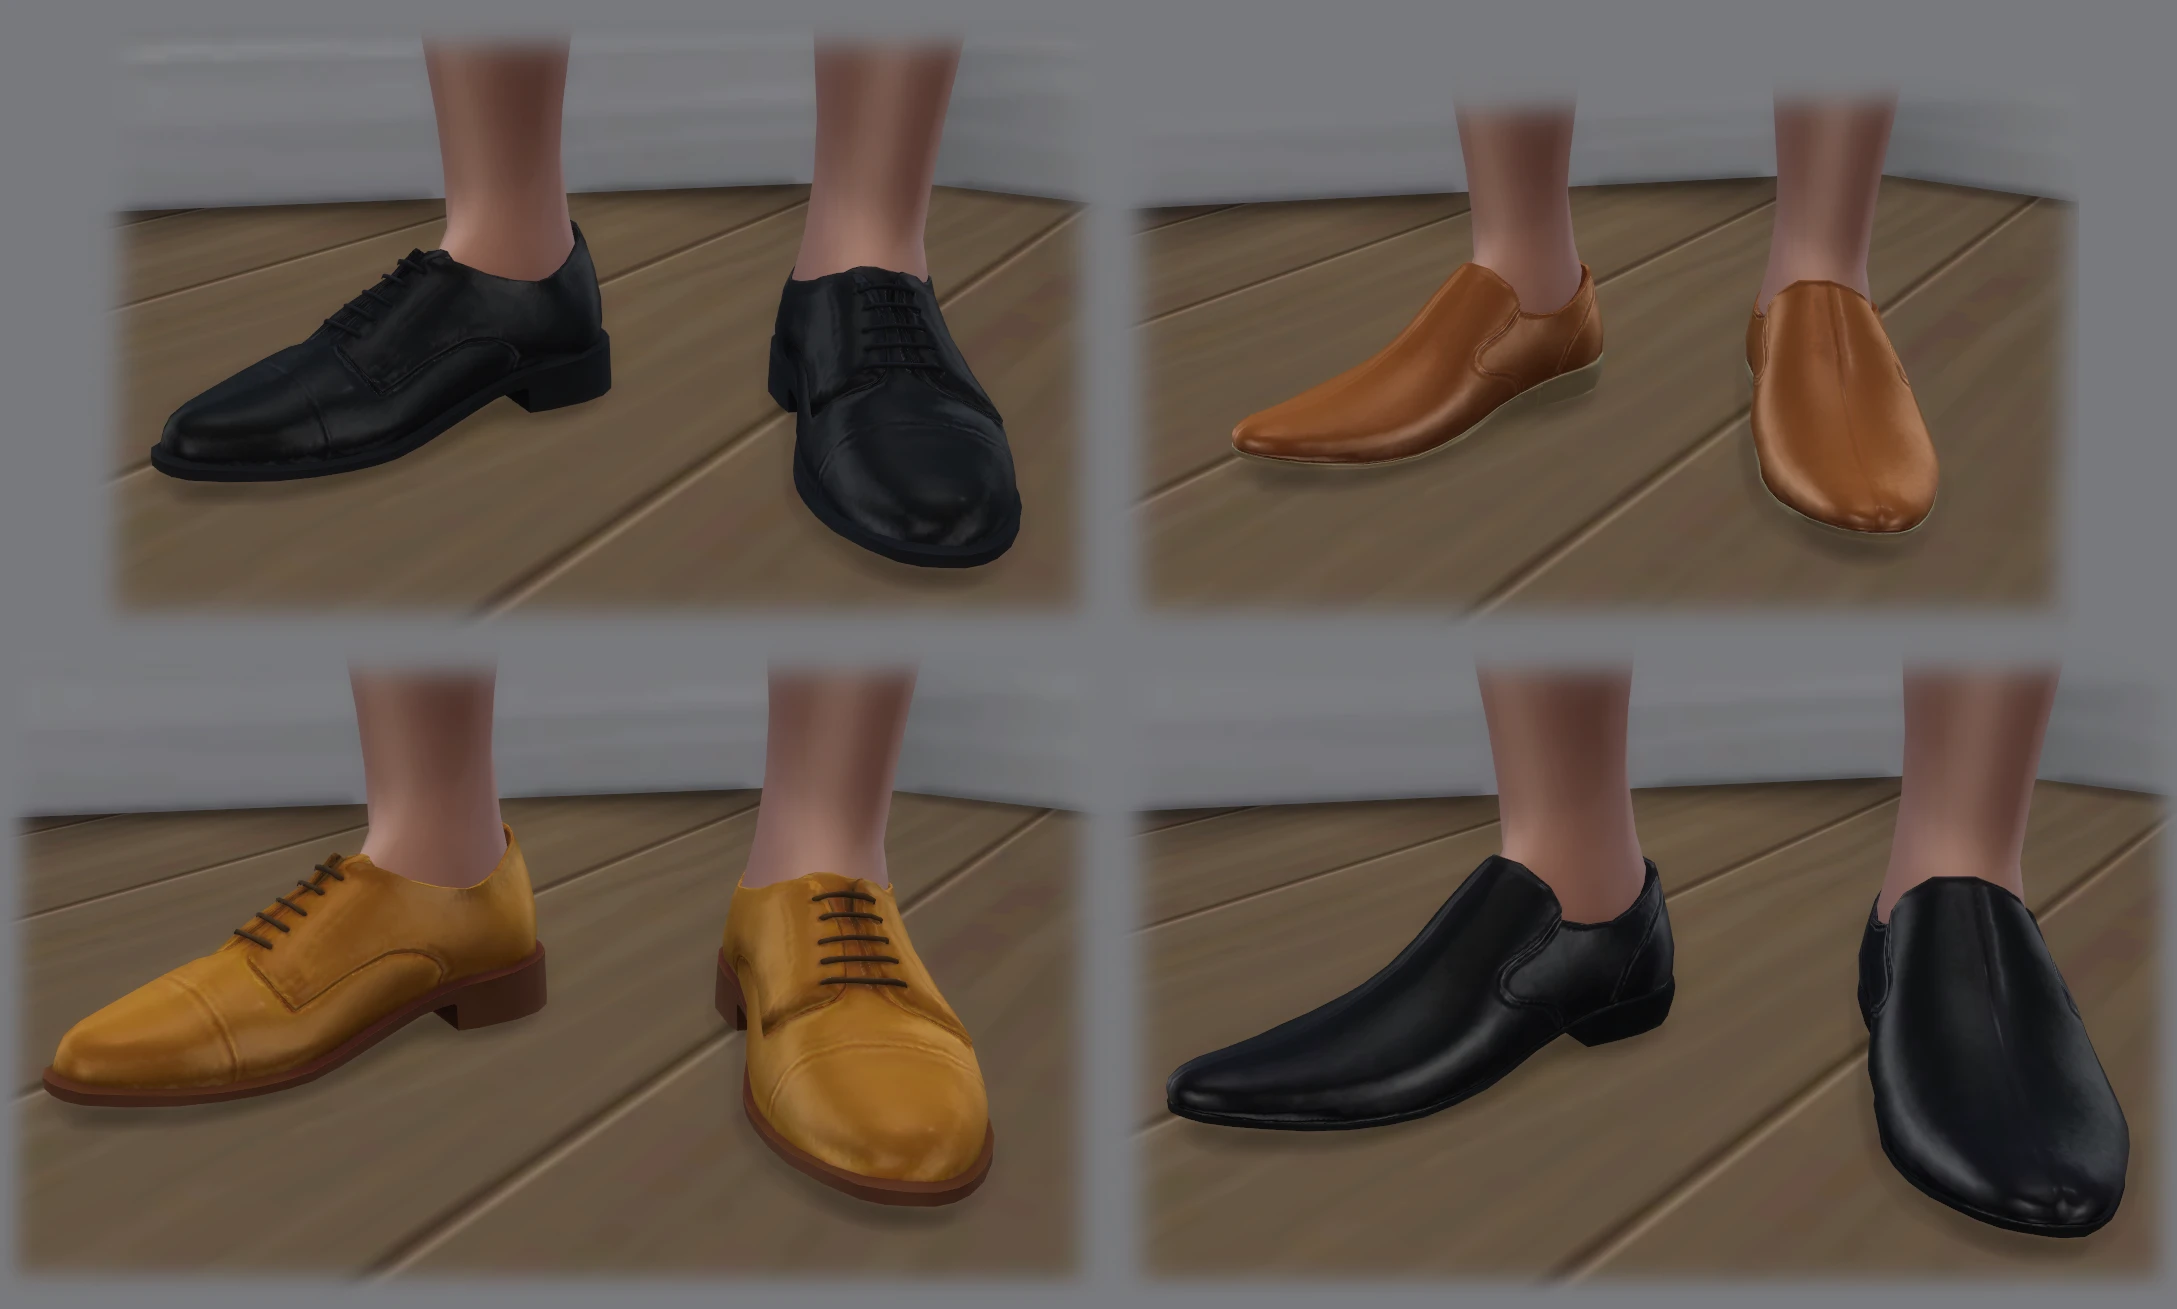 Formal Shoes V2 at The Sims 4 Nexus - Mods and community